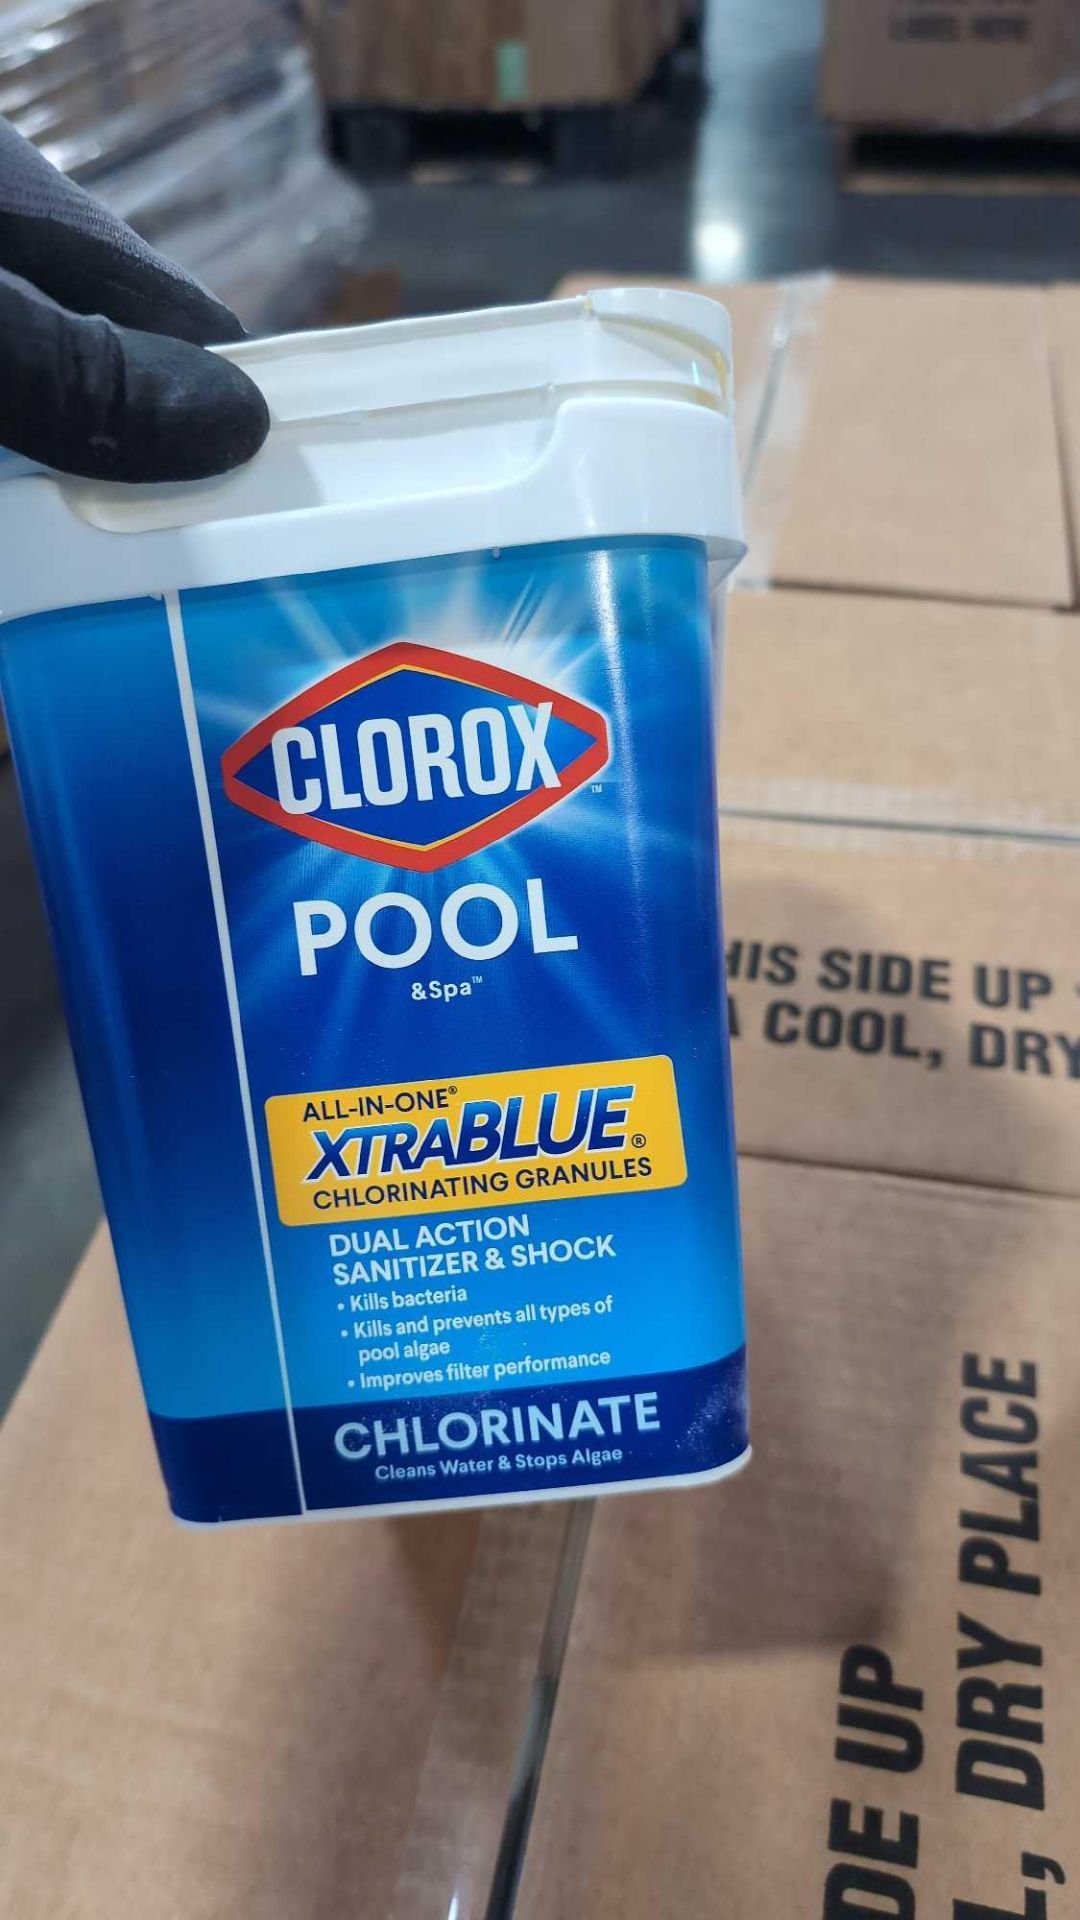 Clorox Pool All-in-one Xtrablue Chlorinating Granules - Image 4 of 7